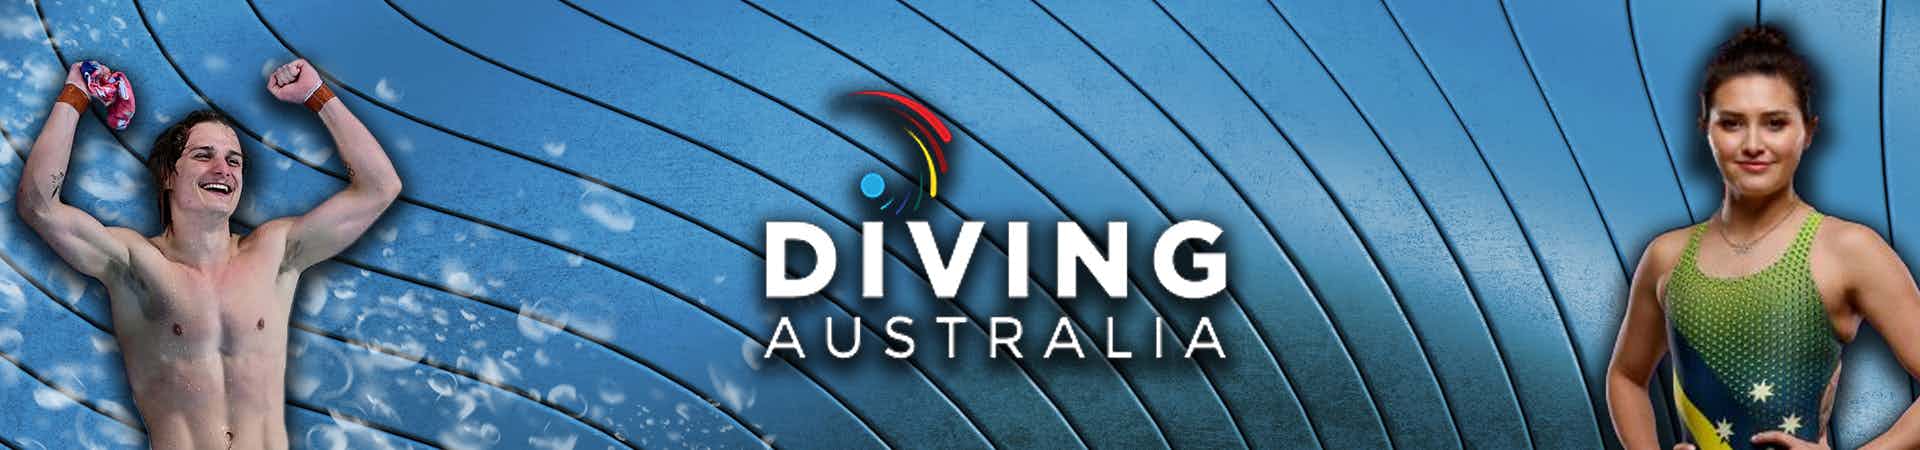 Diving Aus Channel Header Cover Image